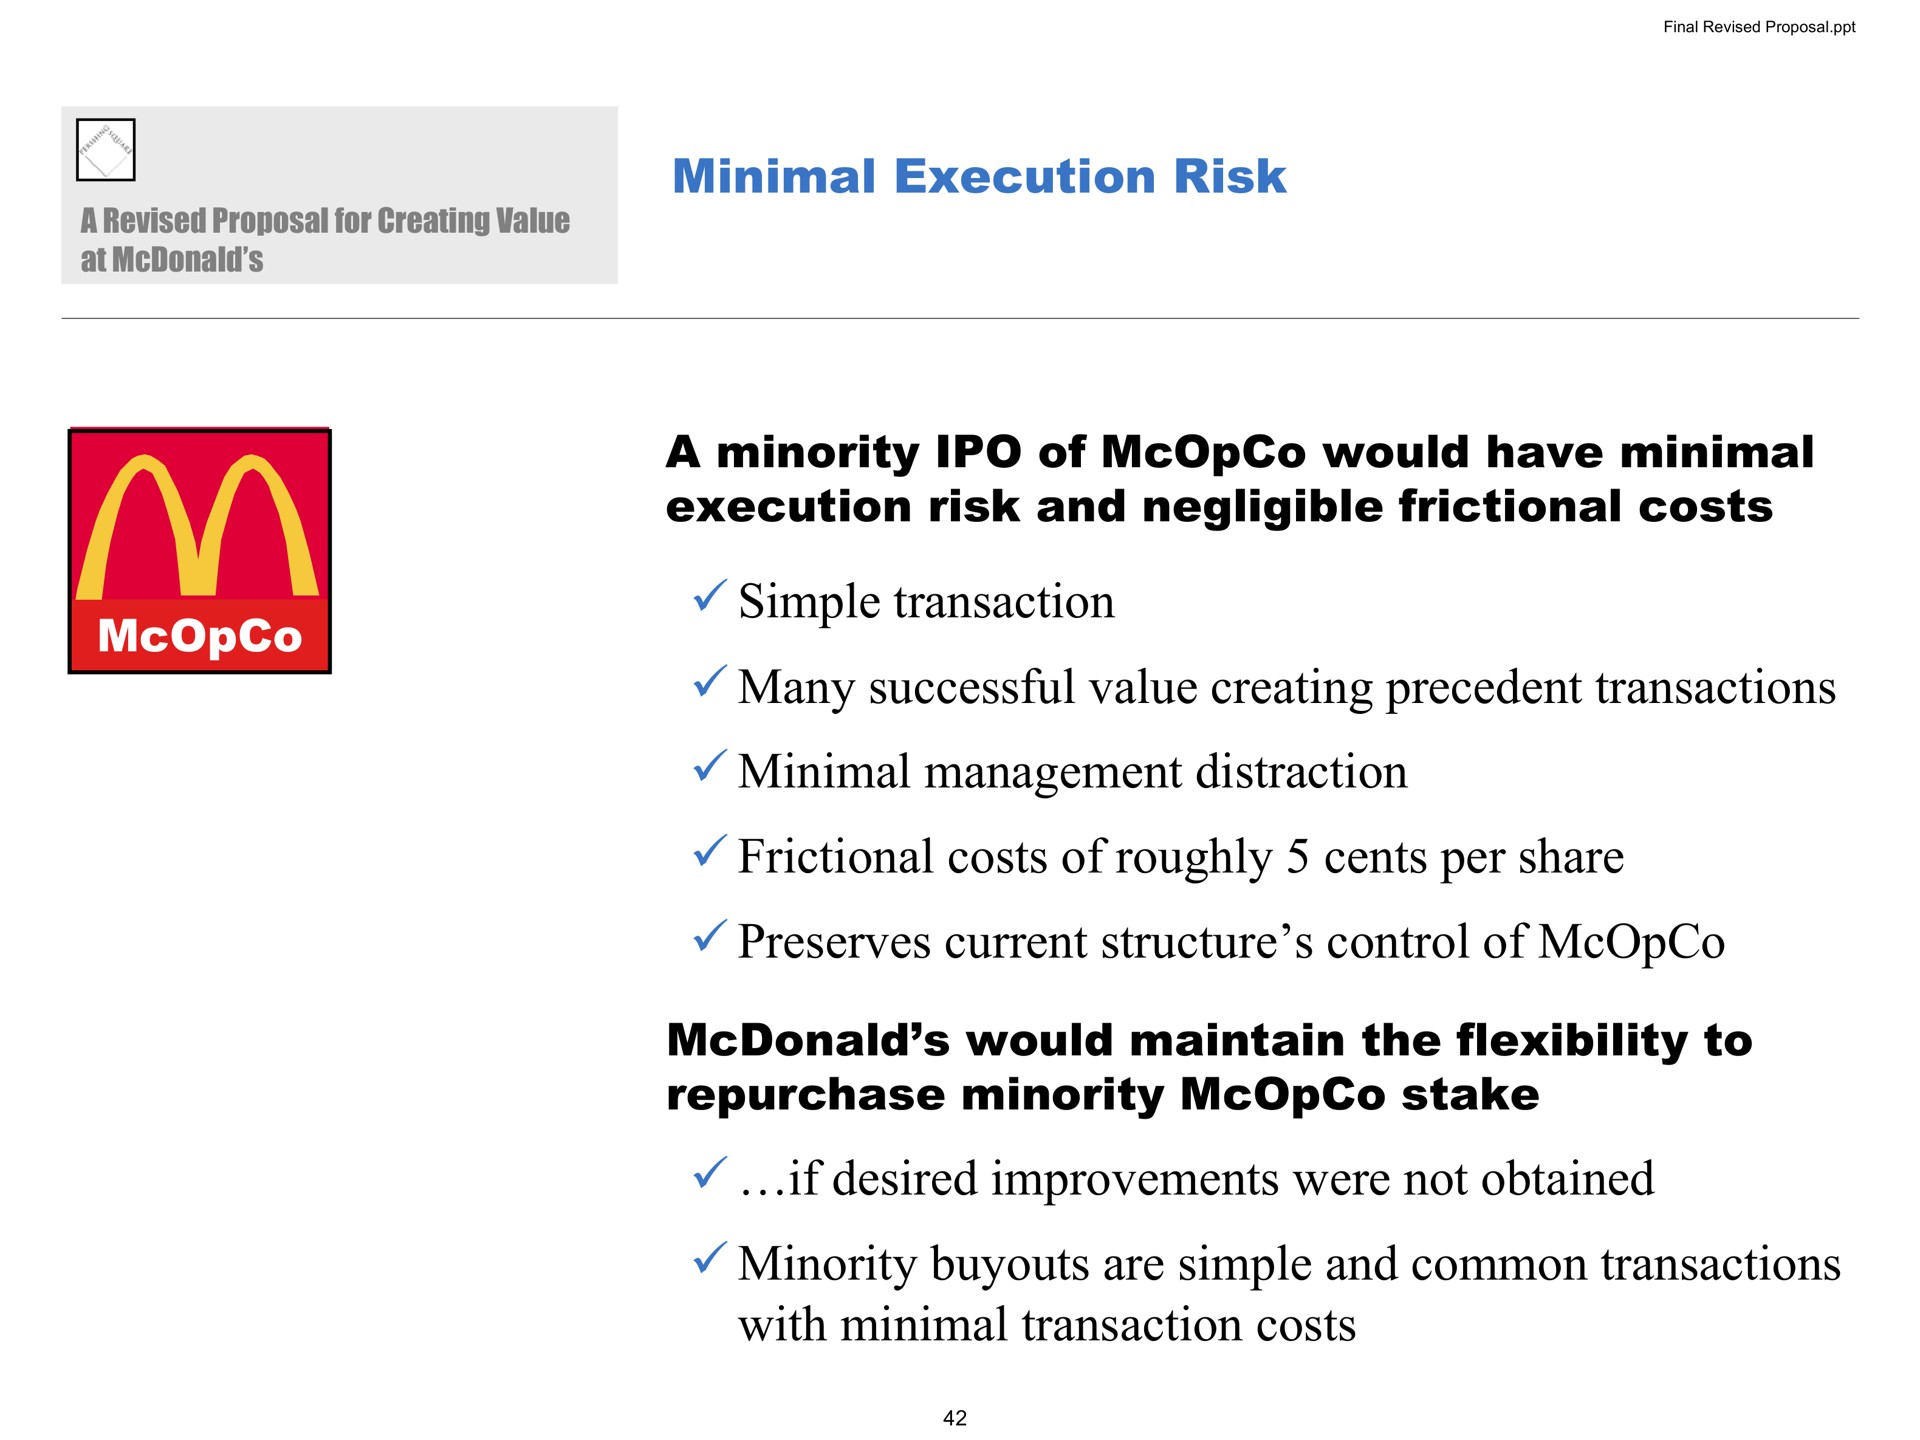 minimal execution risk a minority of would have minimal execution risk and negligible frictional costs simple transaction many successful value creating precedent transactions minimal management distraction frictional costs of roughly cents per share preserves current structure control of would maintain the flexibility to repurchase minority stake if desired improvements were not obtained minority are simple and common transactions with minimal transaction costs | Pershing Square